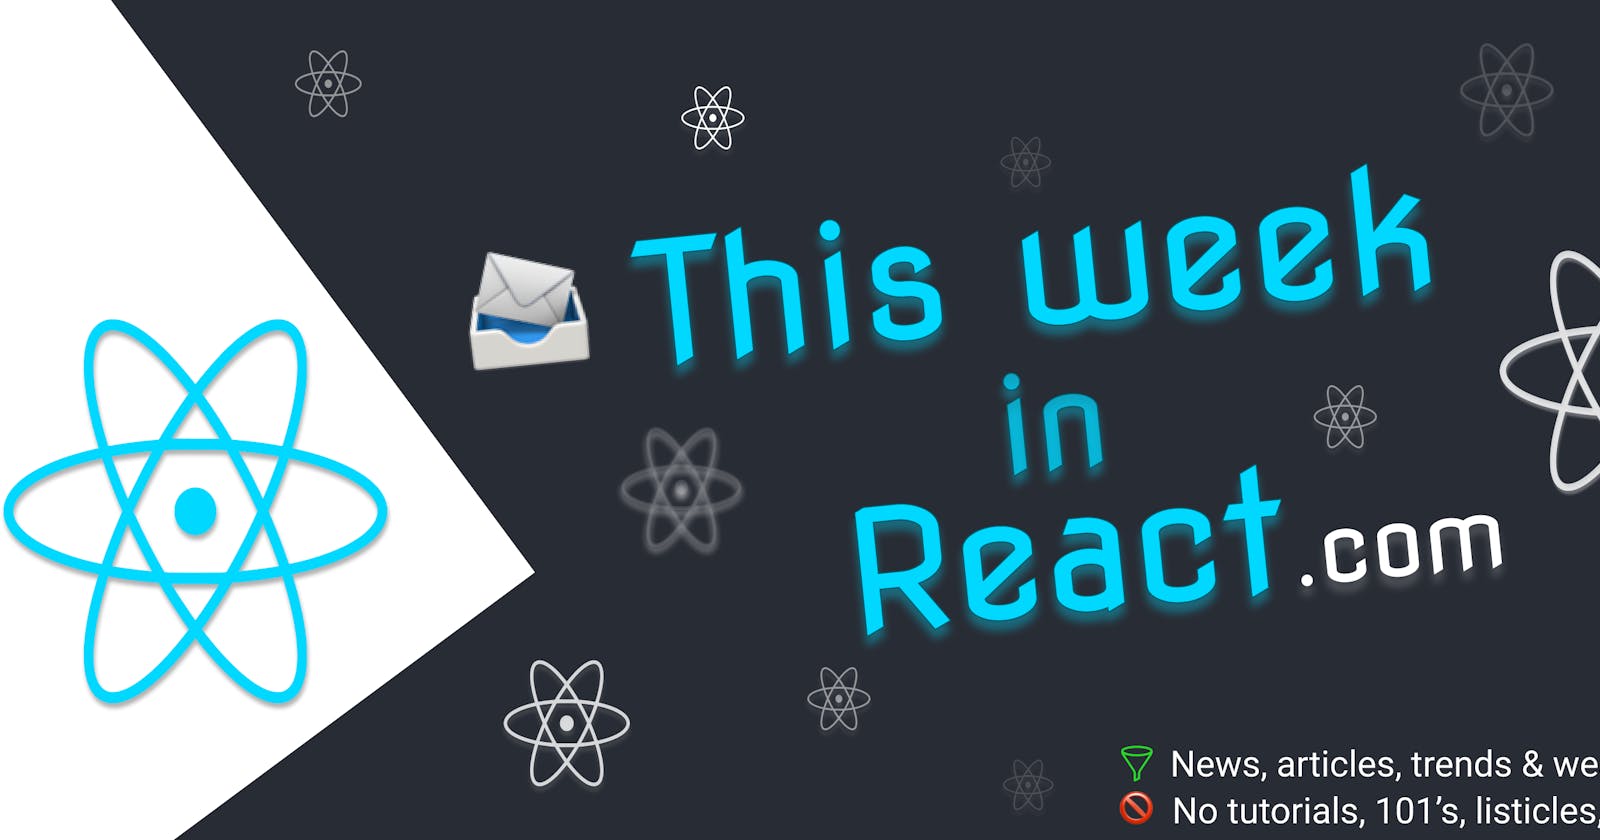 This Week In React #132: Astro, Remix, Server Components, useGlobalState, Next.js, Redwood, Expo Router, Expo Image...